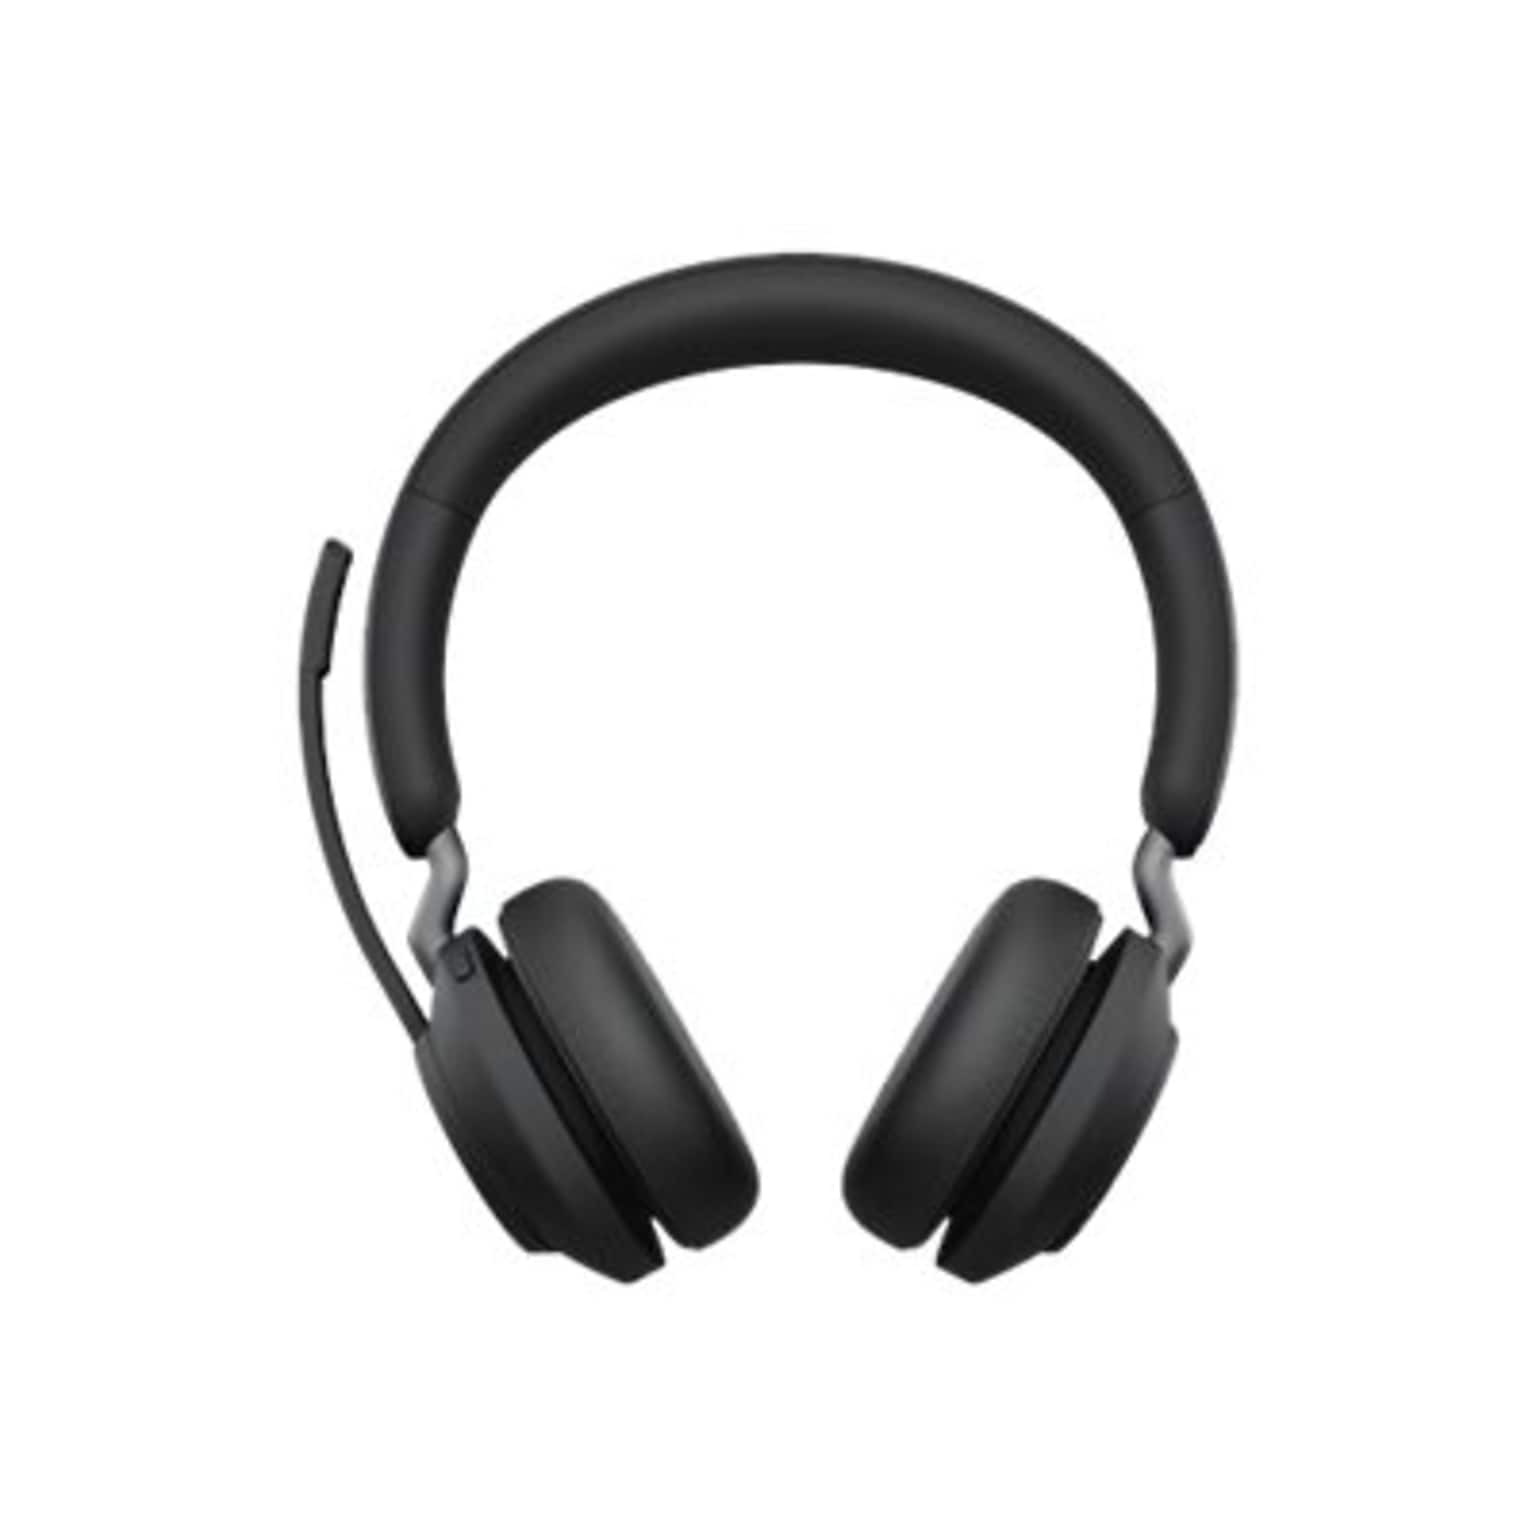 jabra Evolve2 65 MS Stereo USB-A Bluetooth Stereo Computer Headset, UC Certified, Black (26599-999-899)